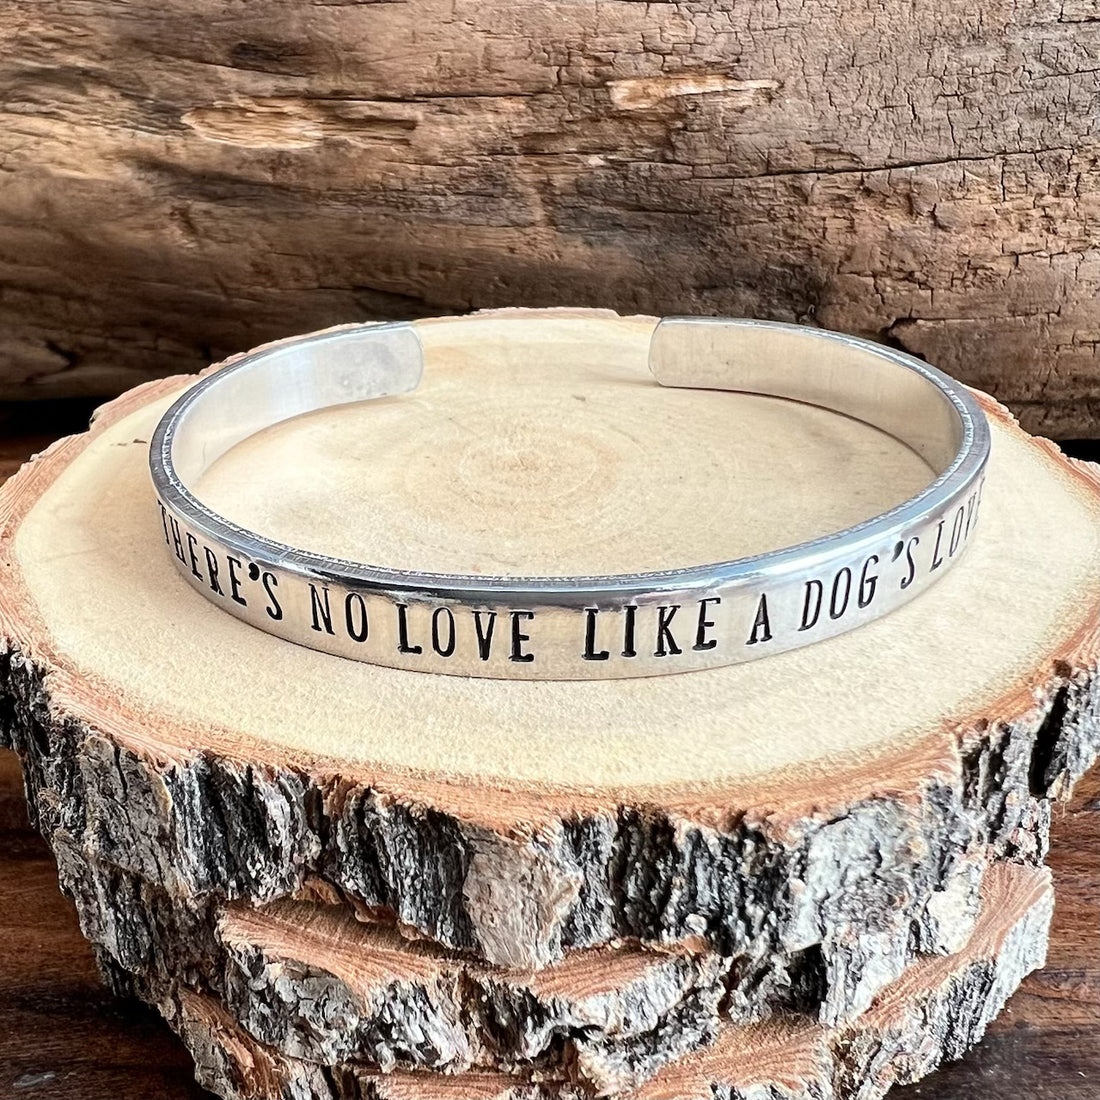 2023 BFDR 'There's No Love Like A Dog's Love' FUNDRAISING BRACELET